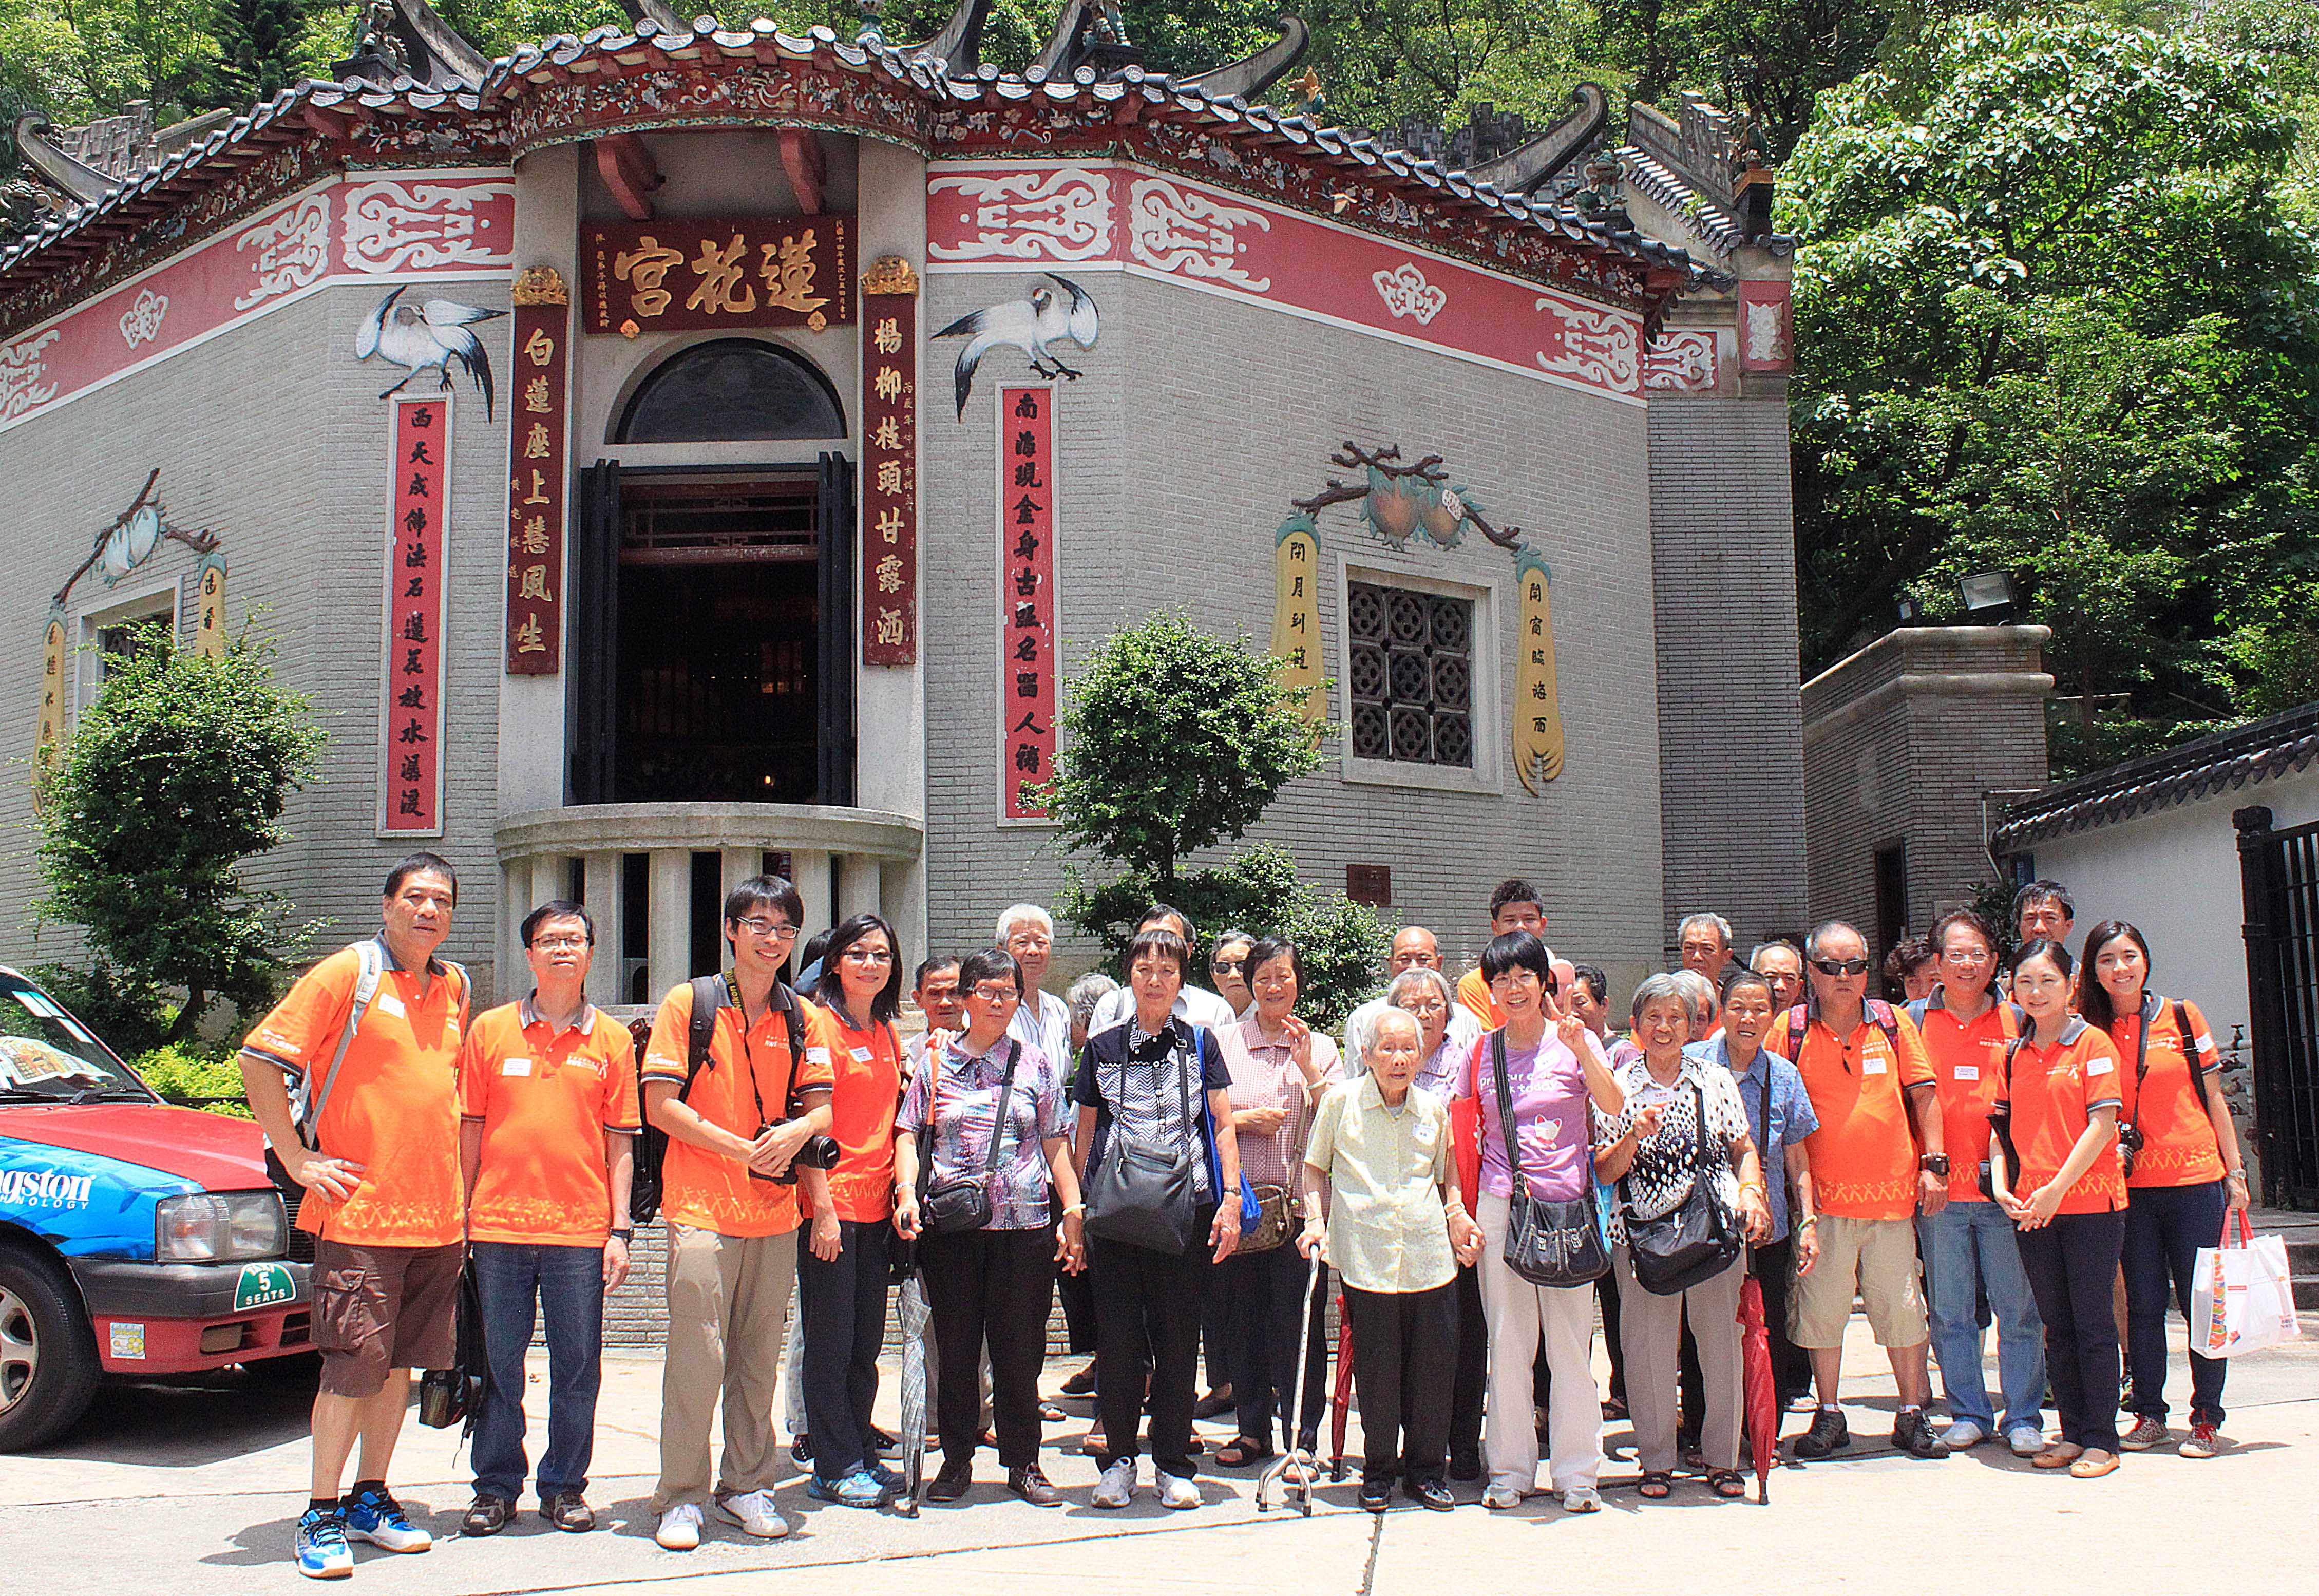 NWS Holdings and Tung Wah Group of Hospitals care for the elderly in Sham Shui Po